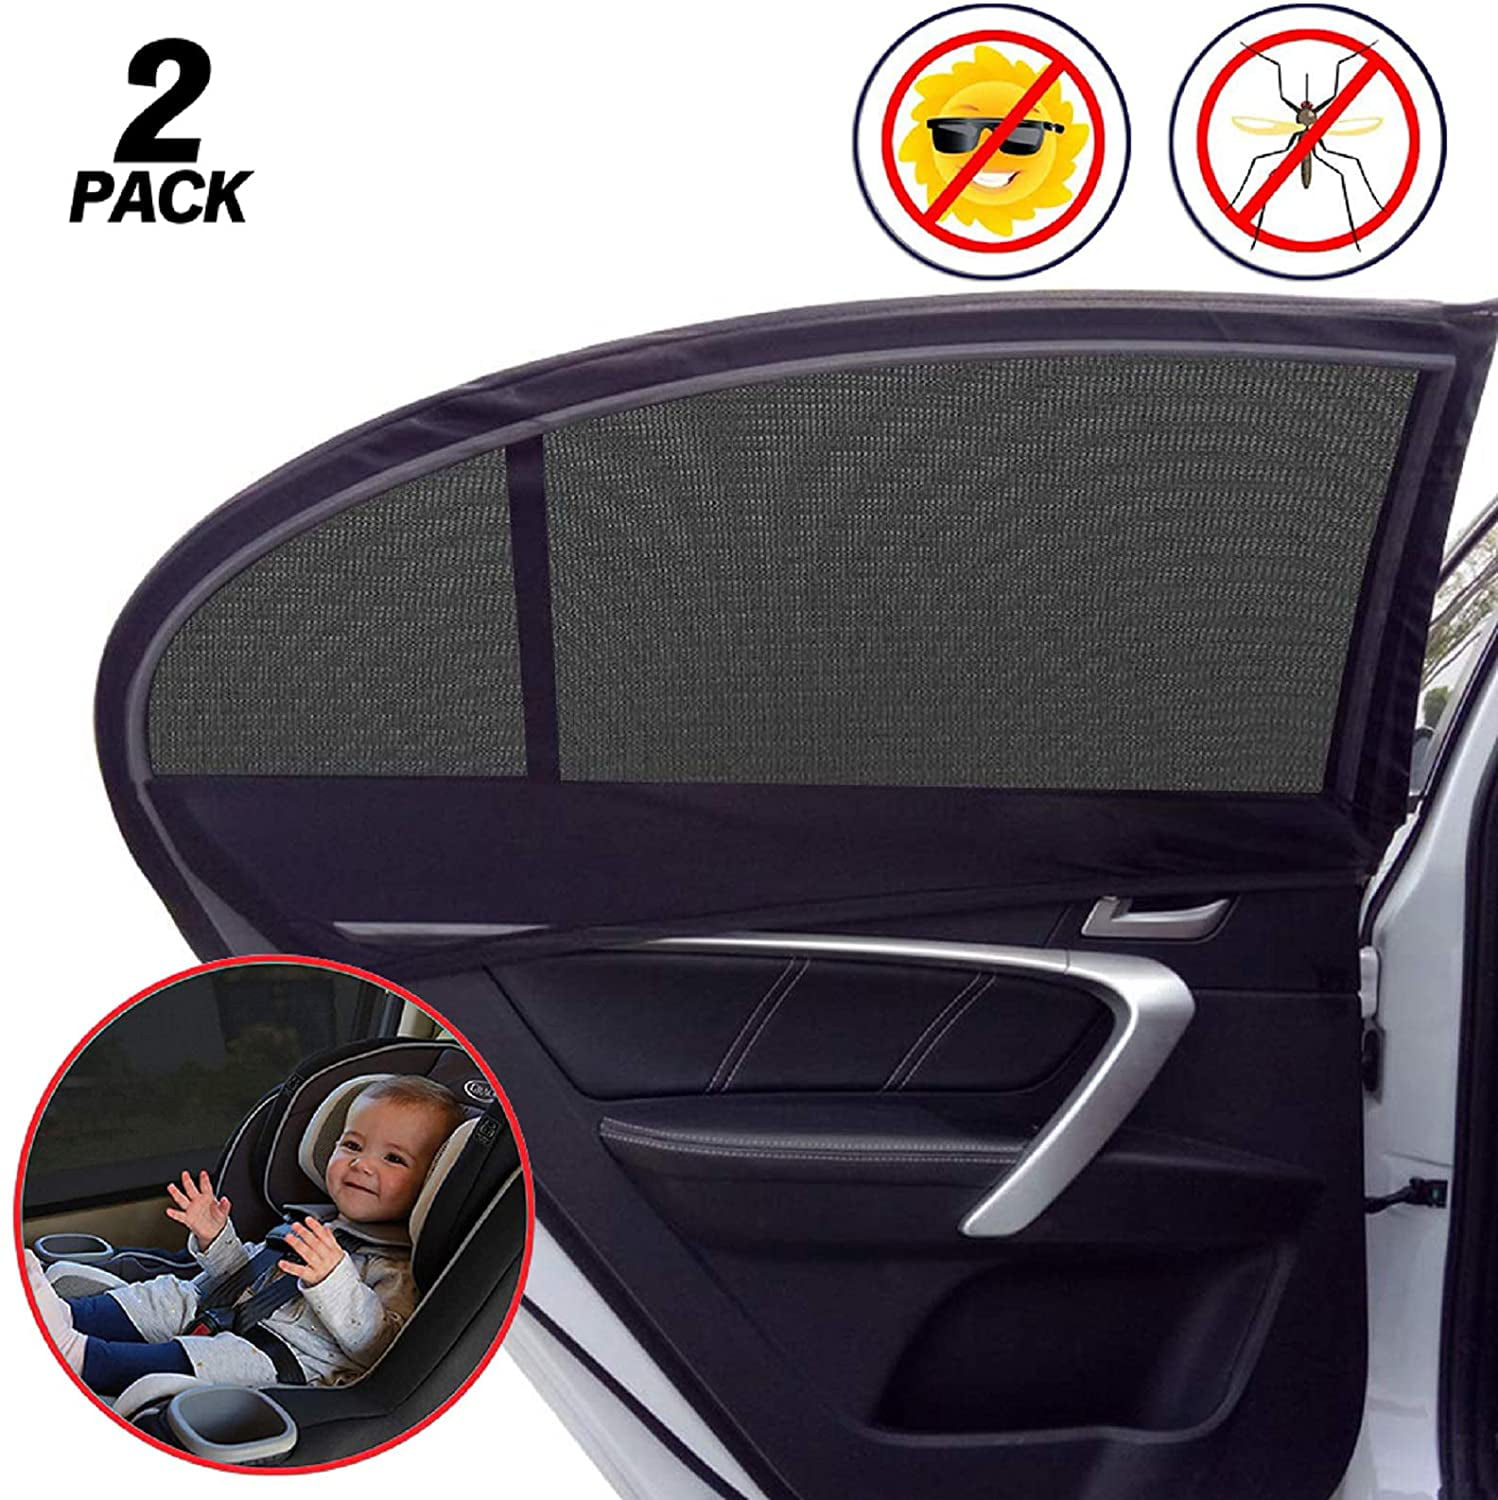 Baby Children Kids Car Window Sun Shades Blinds UV Protection pack of 2 